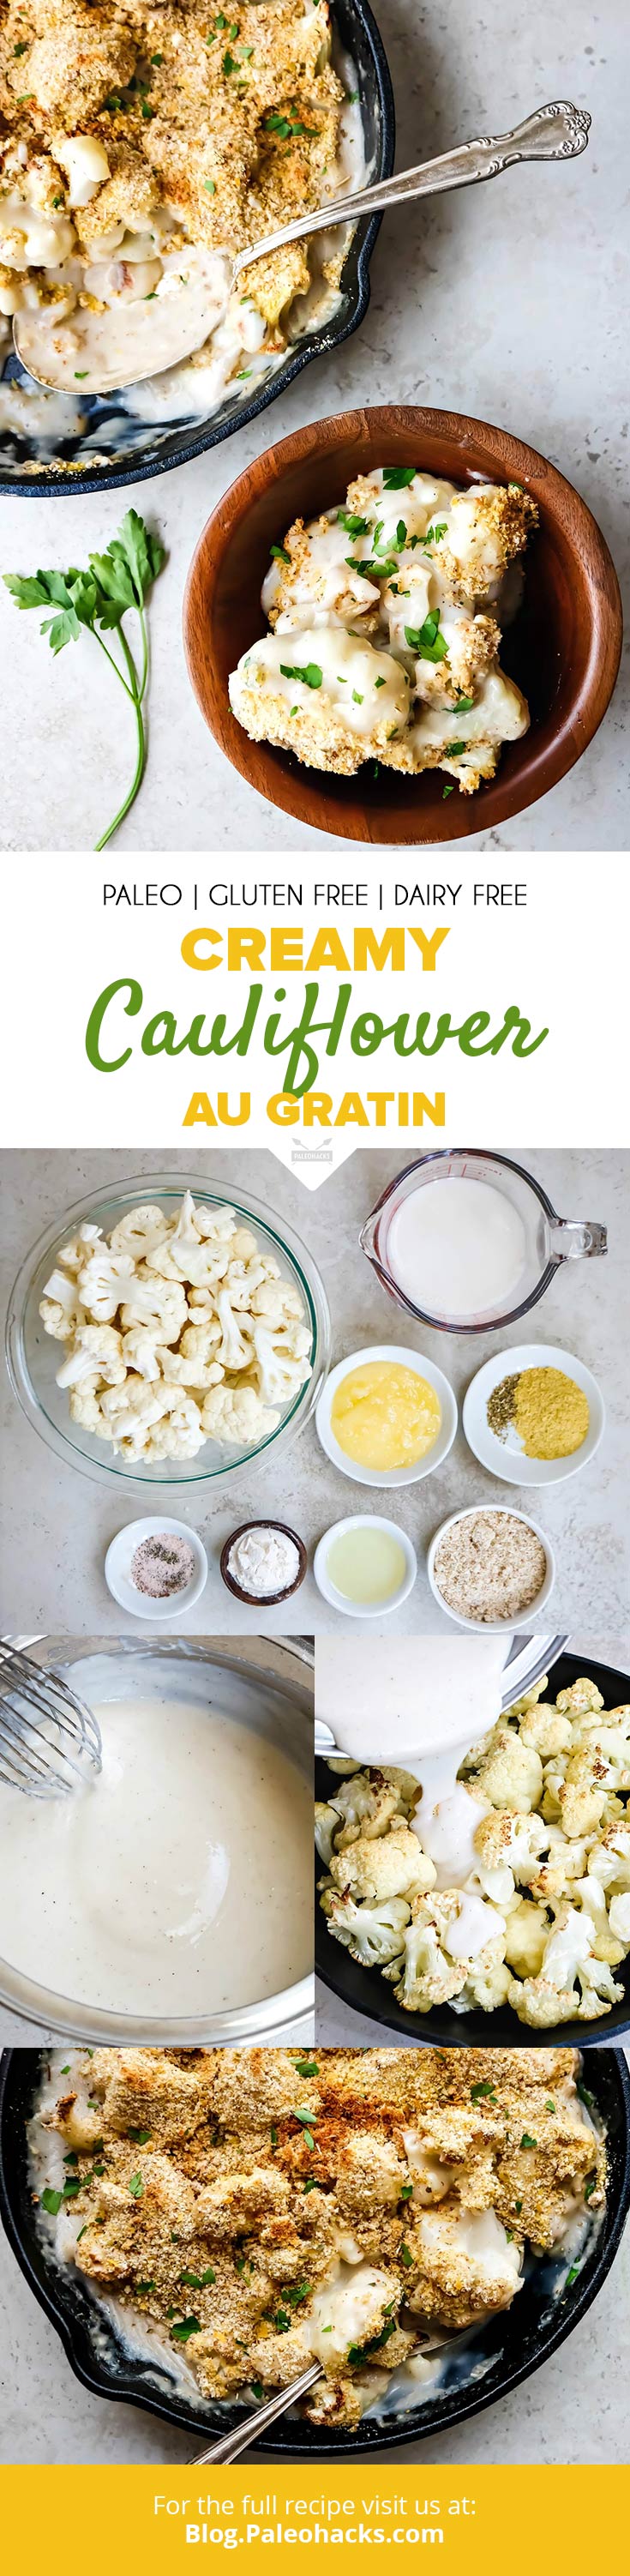 Chow down on this Cauliflower Au Gratin smothered in dairy-free béchemal sauce for a savory recipe that’s hearty enough to be your main dish, too.